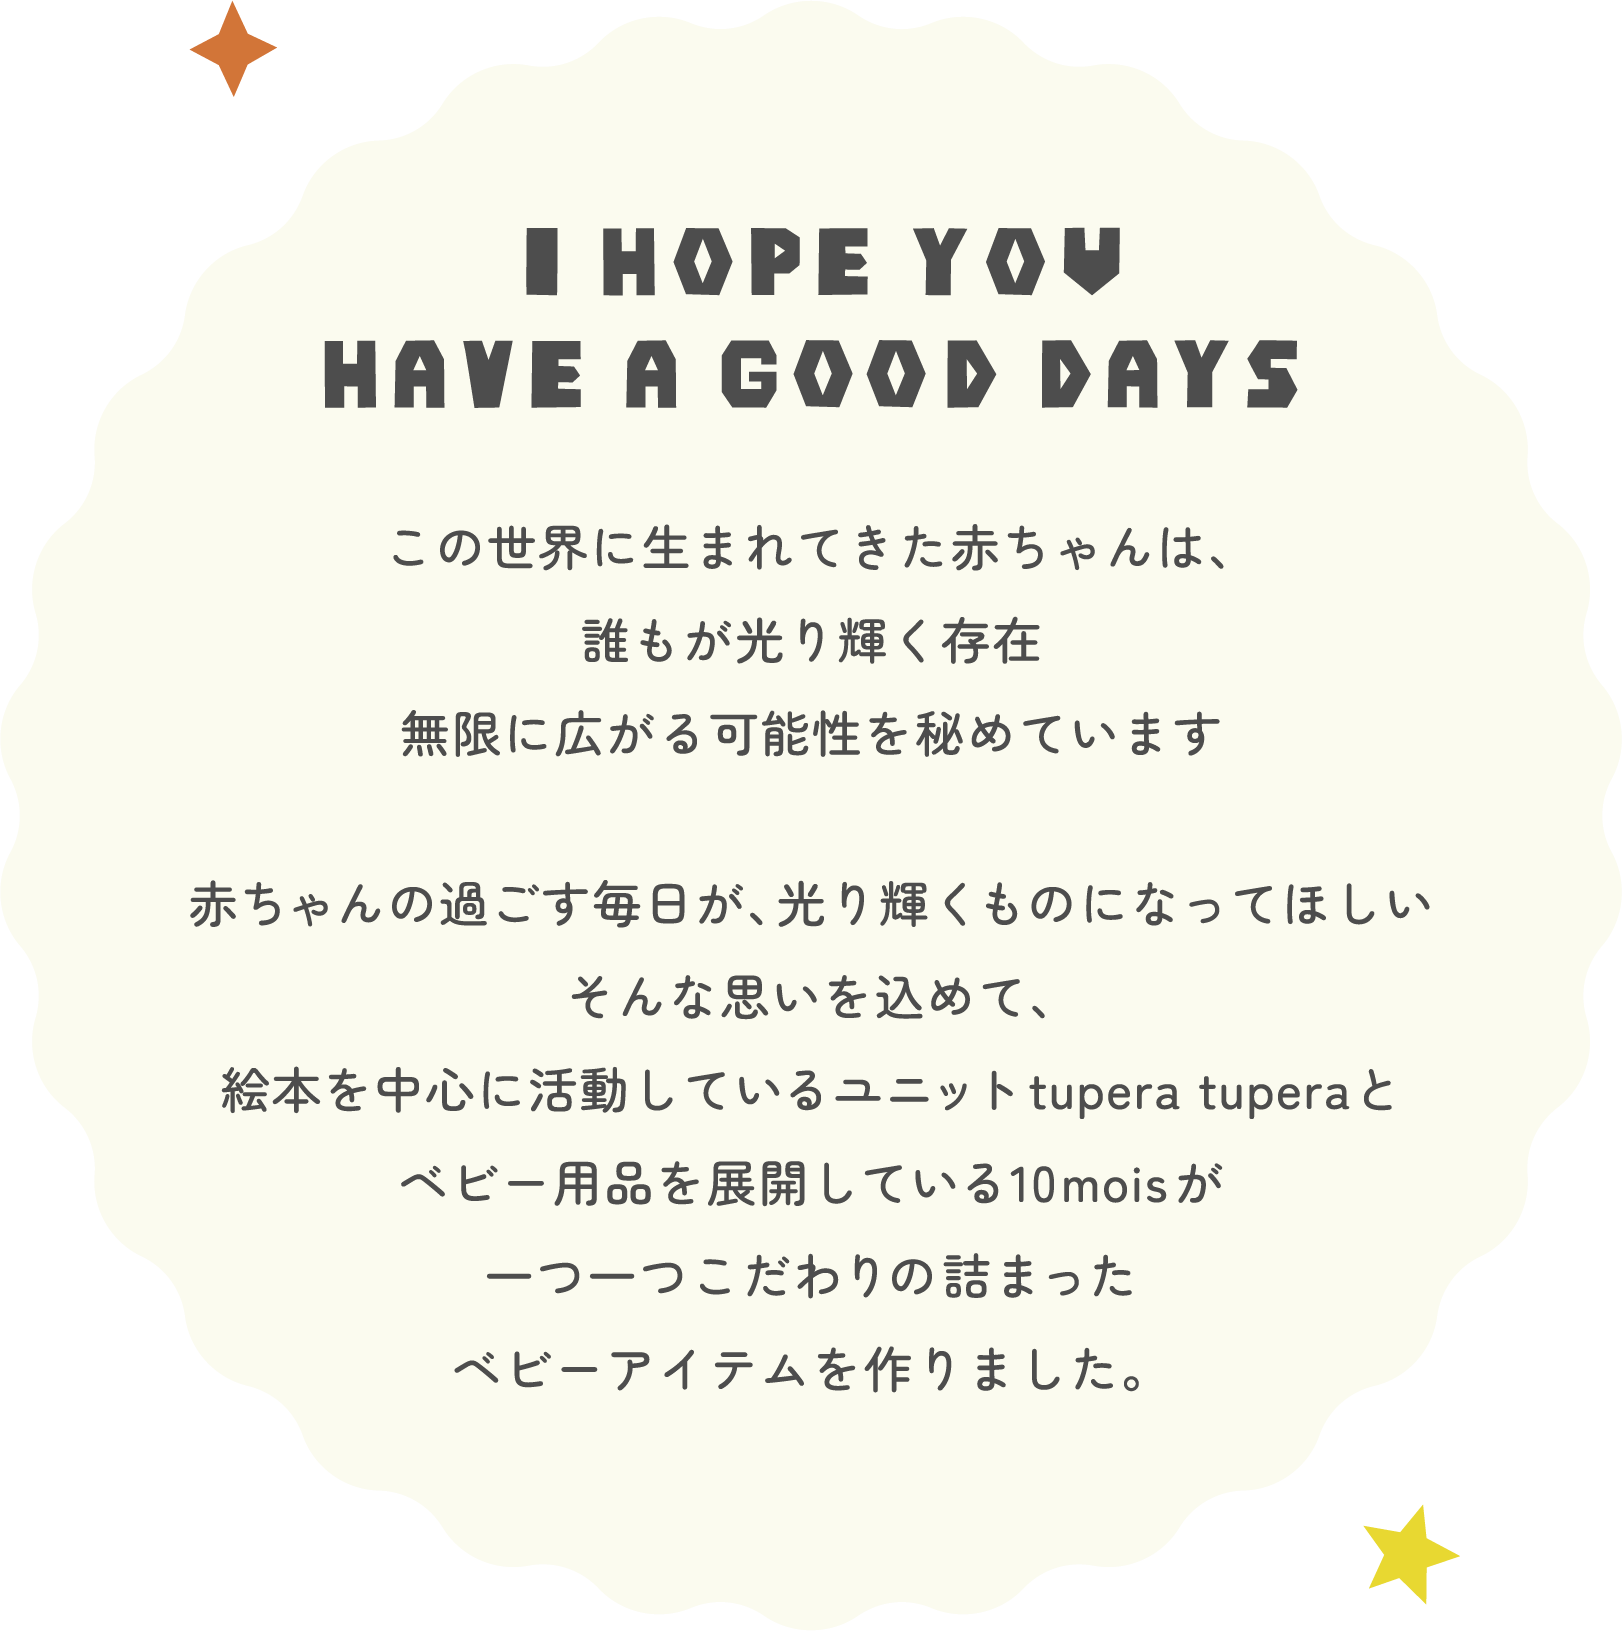 I HOPE YOU HAVE A GOOD DAYS